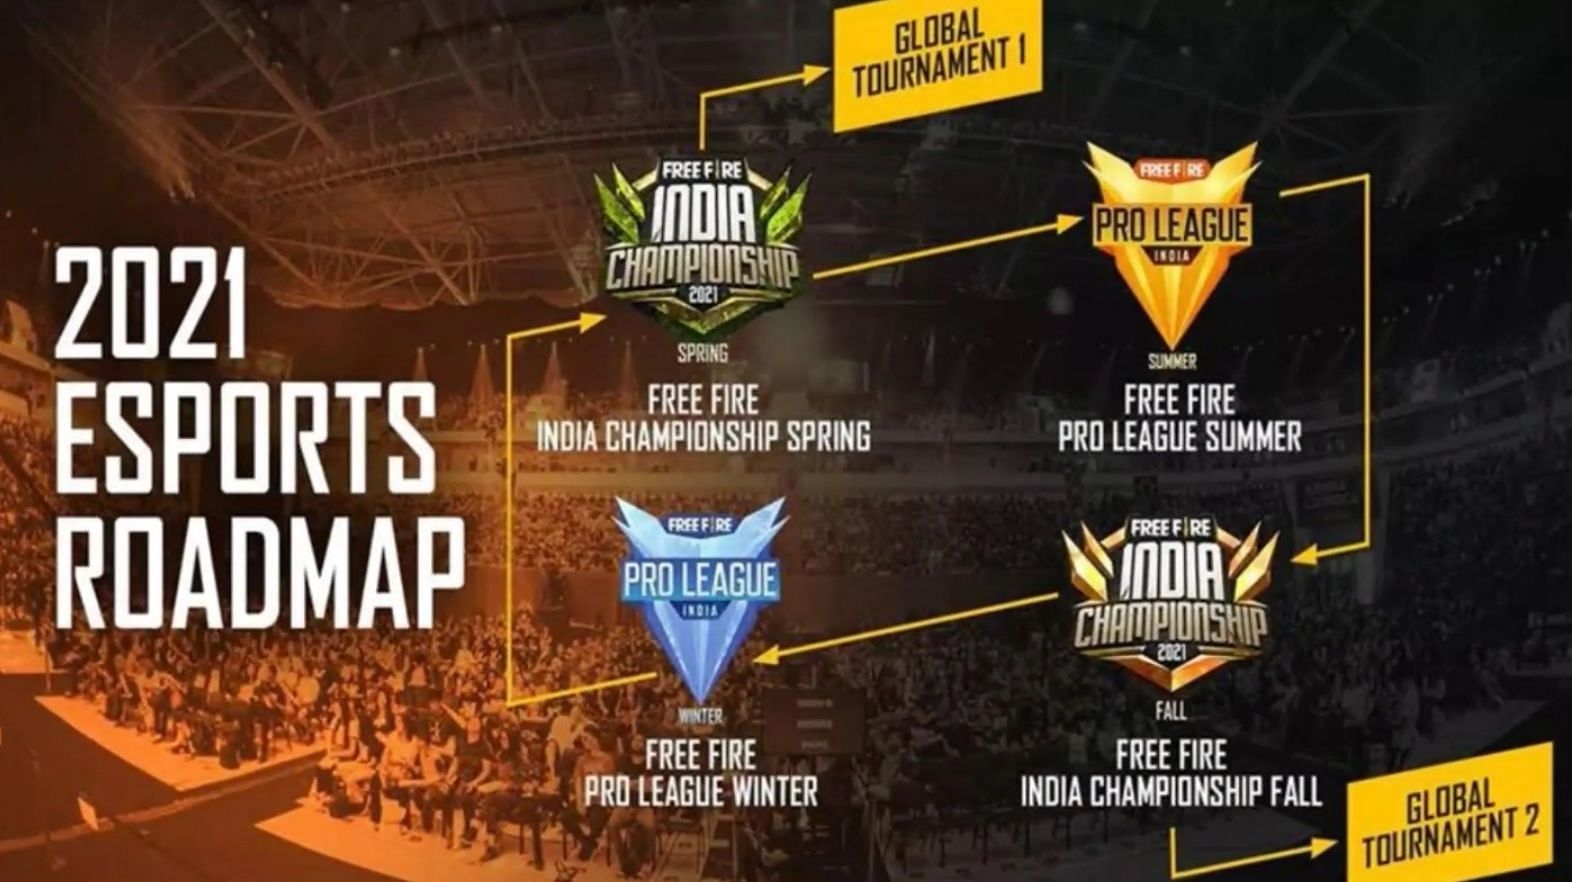 Free Fire Esports 2021 Road Map for India